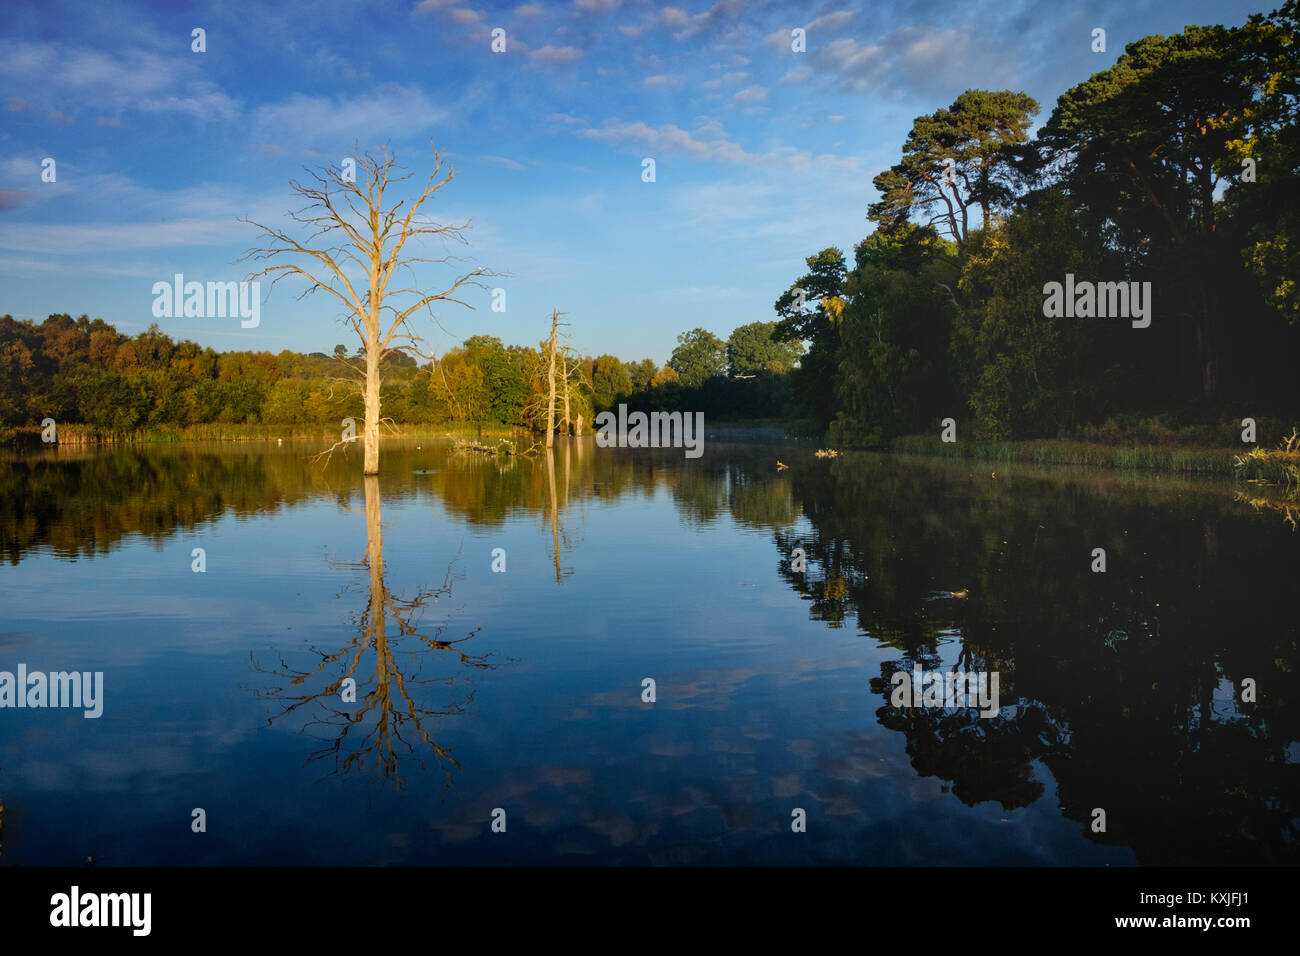 Surreal landscape at Clumber Park, Nottinghamshire. Dead tree in lake. Stock Photo